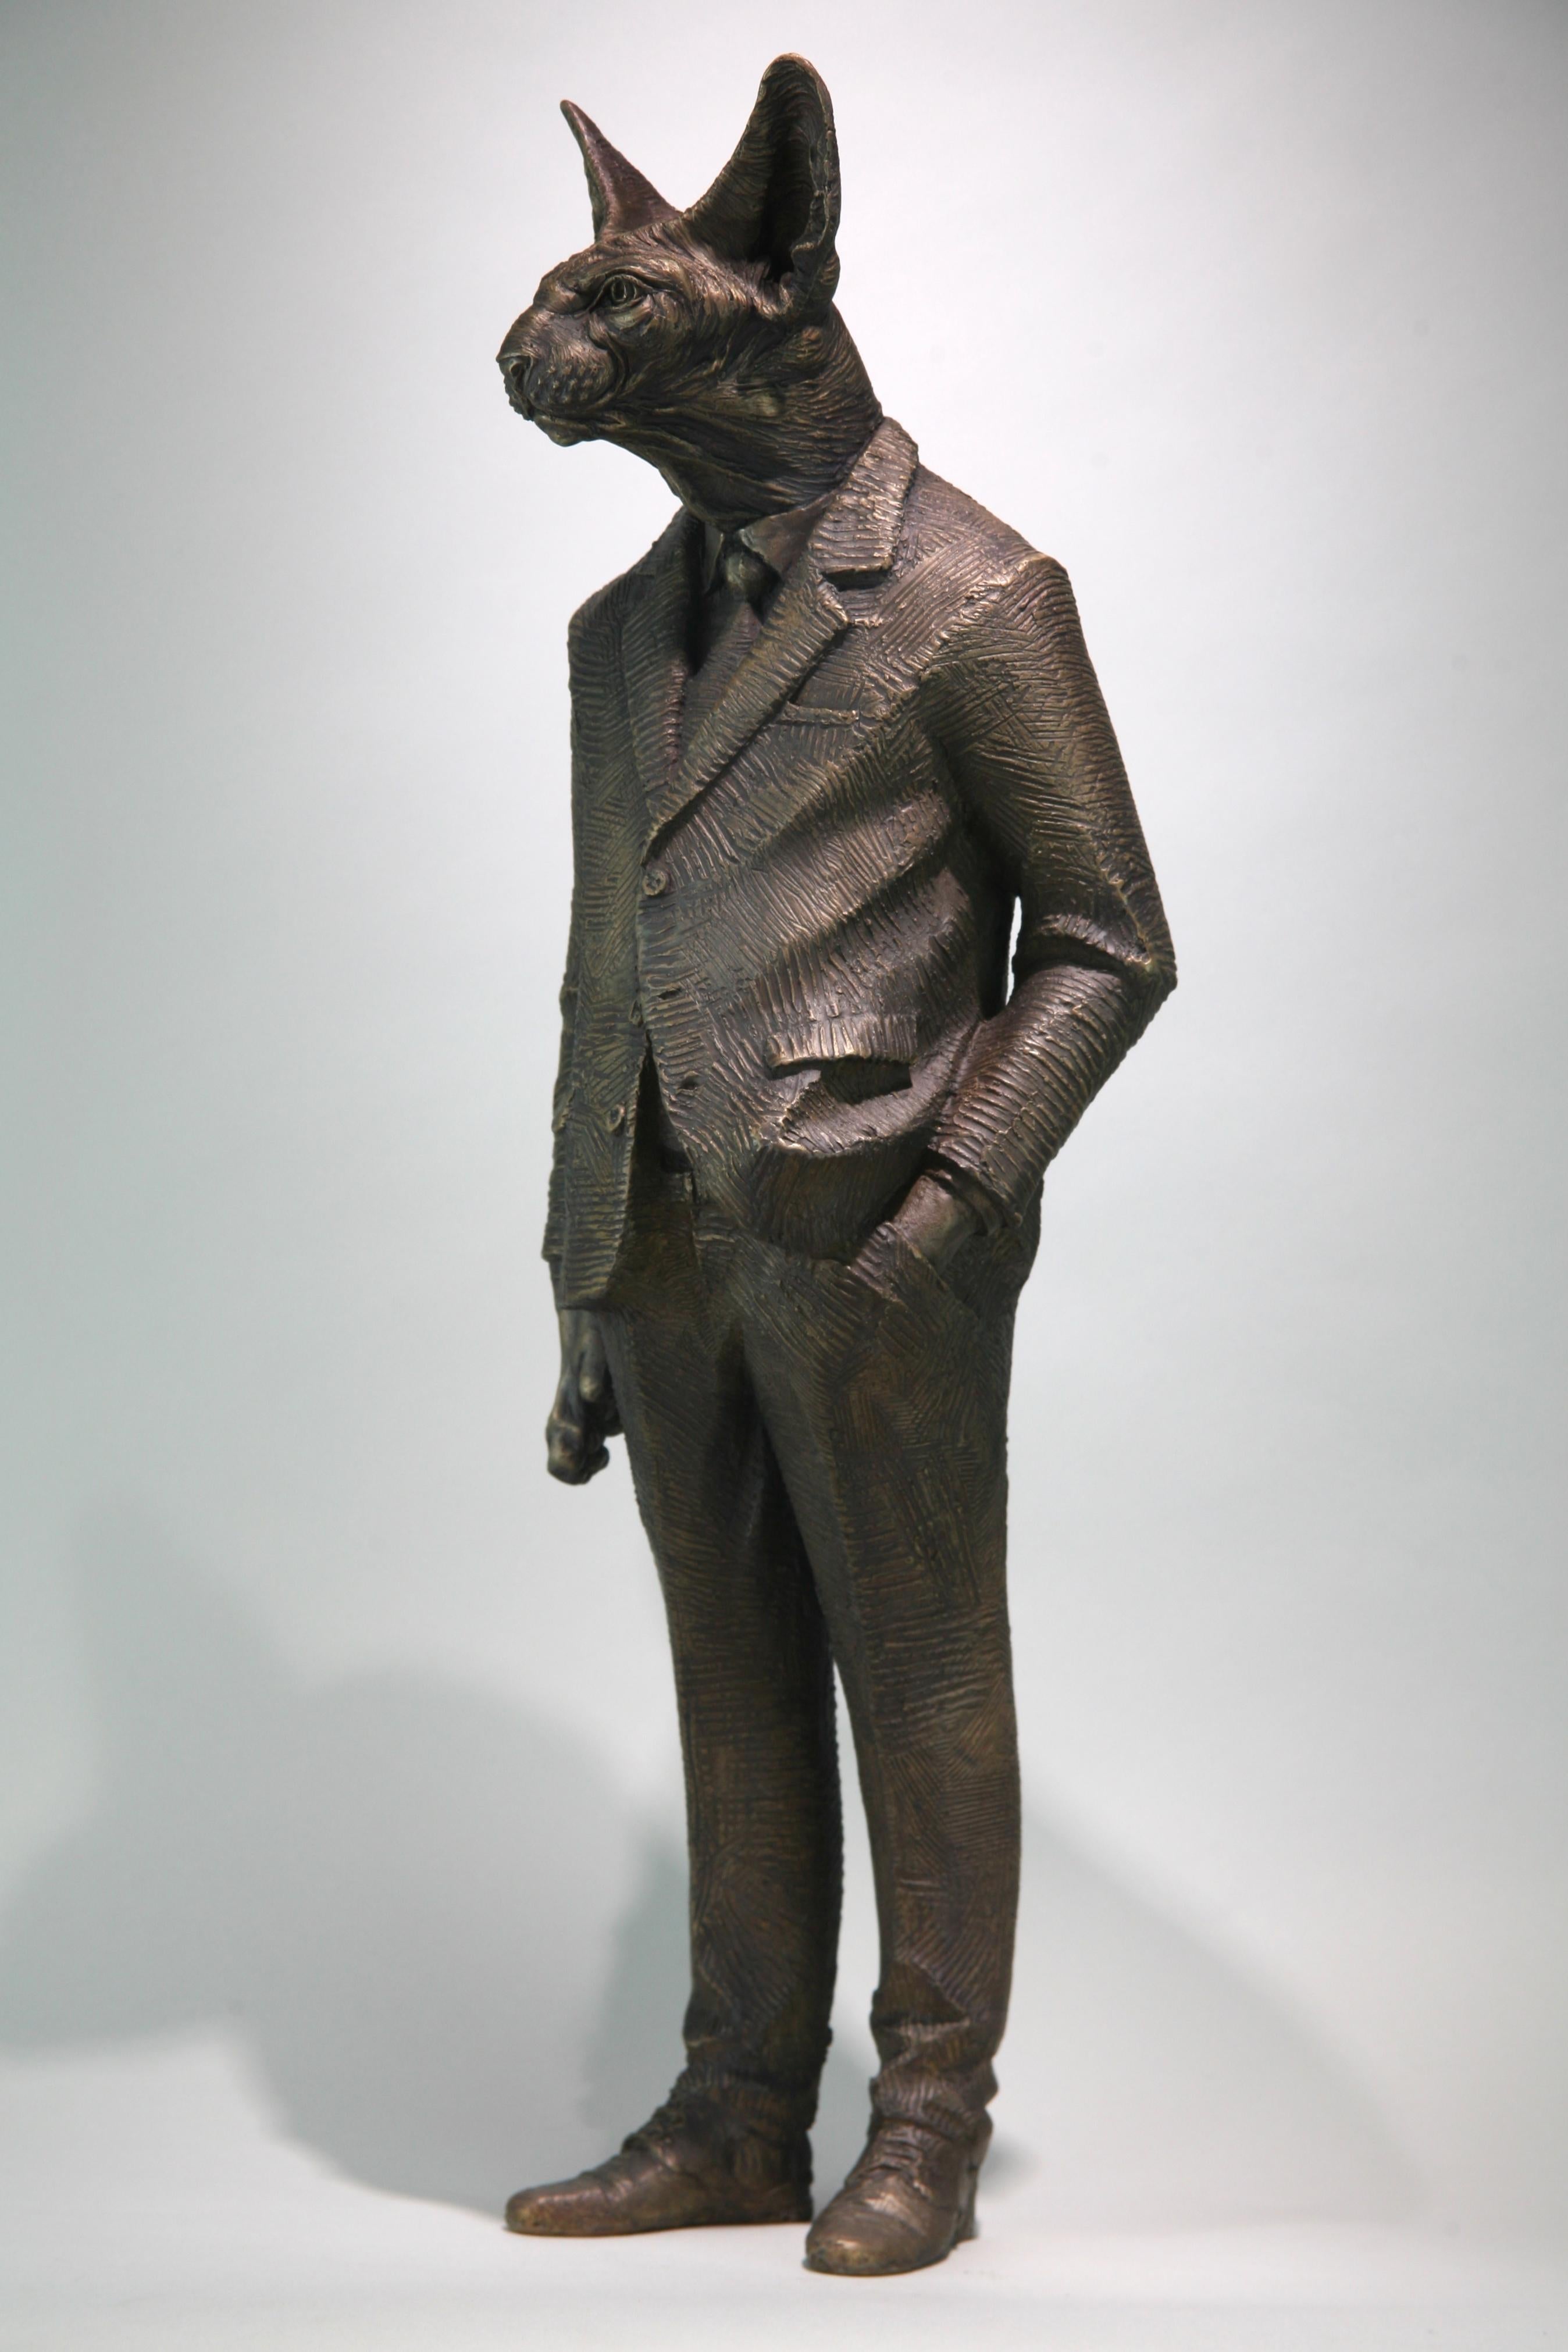 'Sphynxman'; figurative bronze sculpture, Limited Edition of 8. 

Andrzej graduated with an MA degree in Fine Arts in the faculty of Sculpture from The Academy of Fine Arts in Krakow in 2012. He also studied at The Newcastle University at the